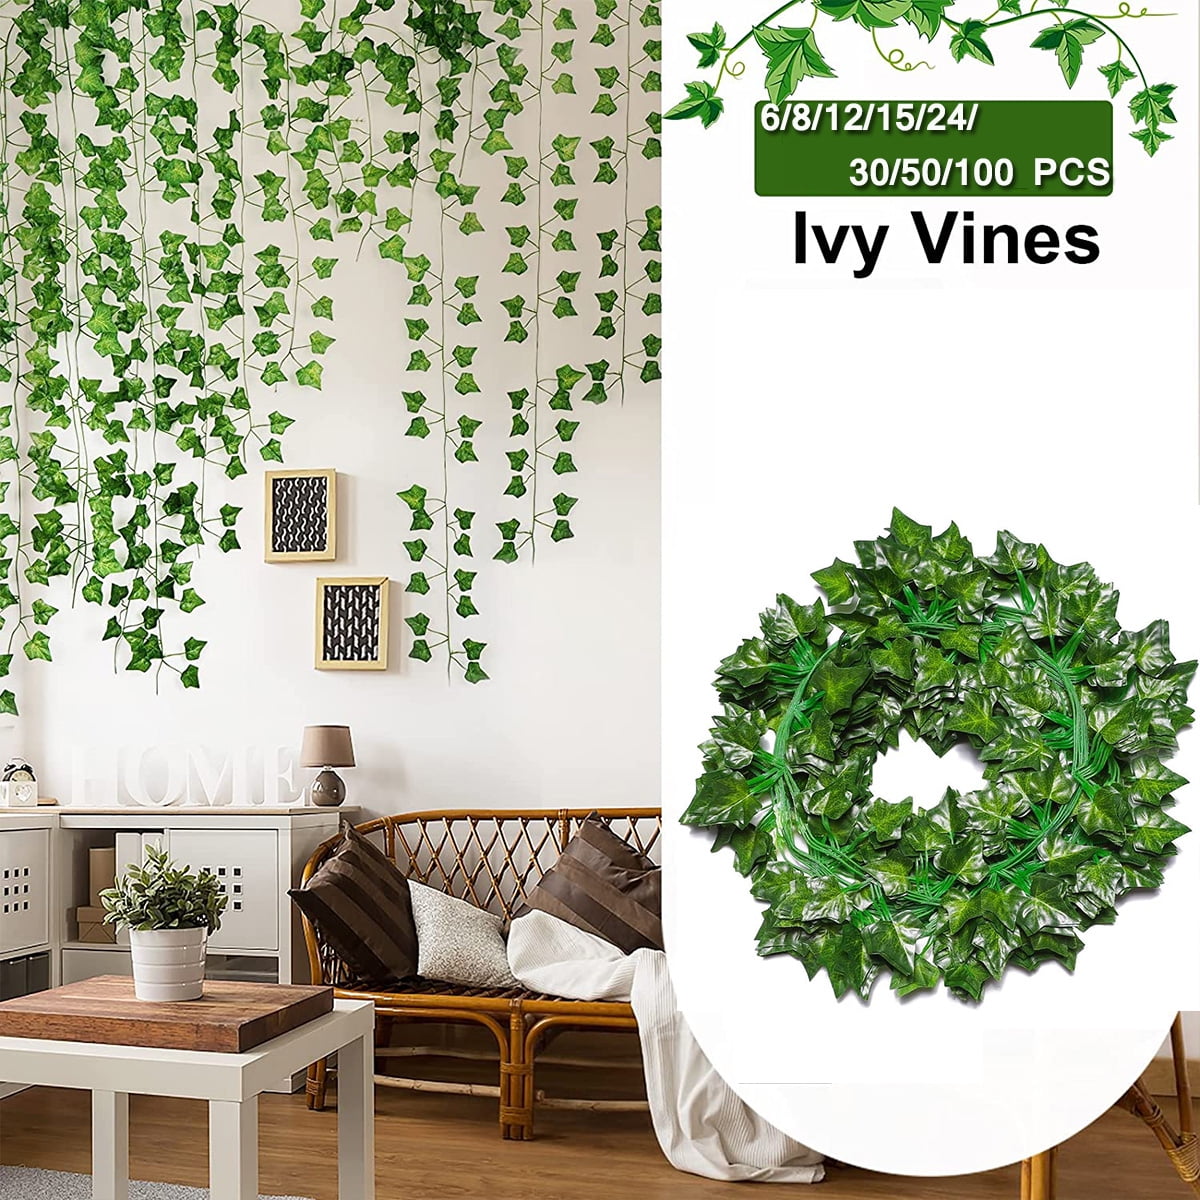 Wabjtam 24pcs Fake Vines Fake Ivy Leaves Artificial Ivy, Ivy Garland  Greenery Vines For Bedroom Decor Aesthetic Silk Ivy Vines For Room Wall  Decor